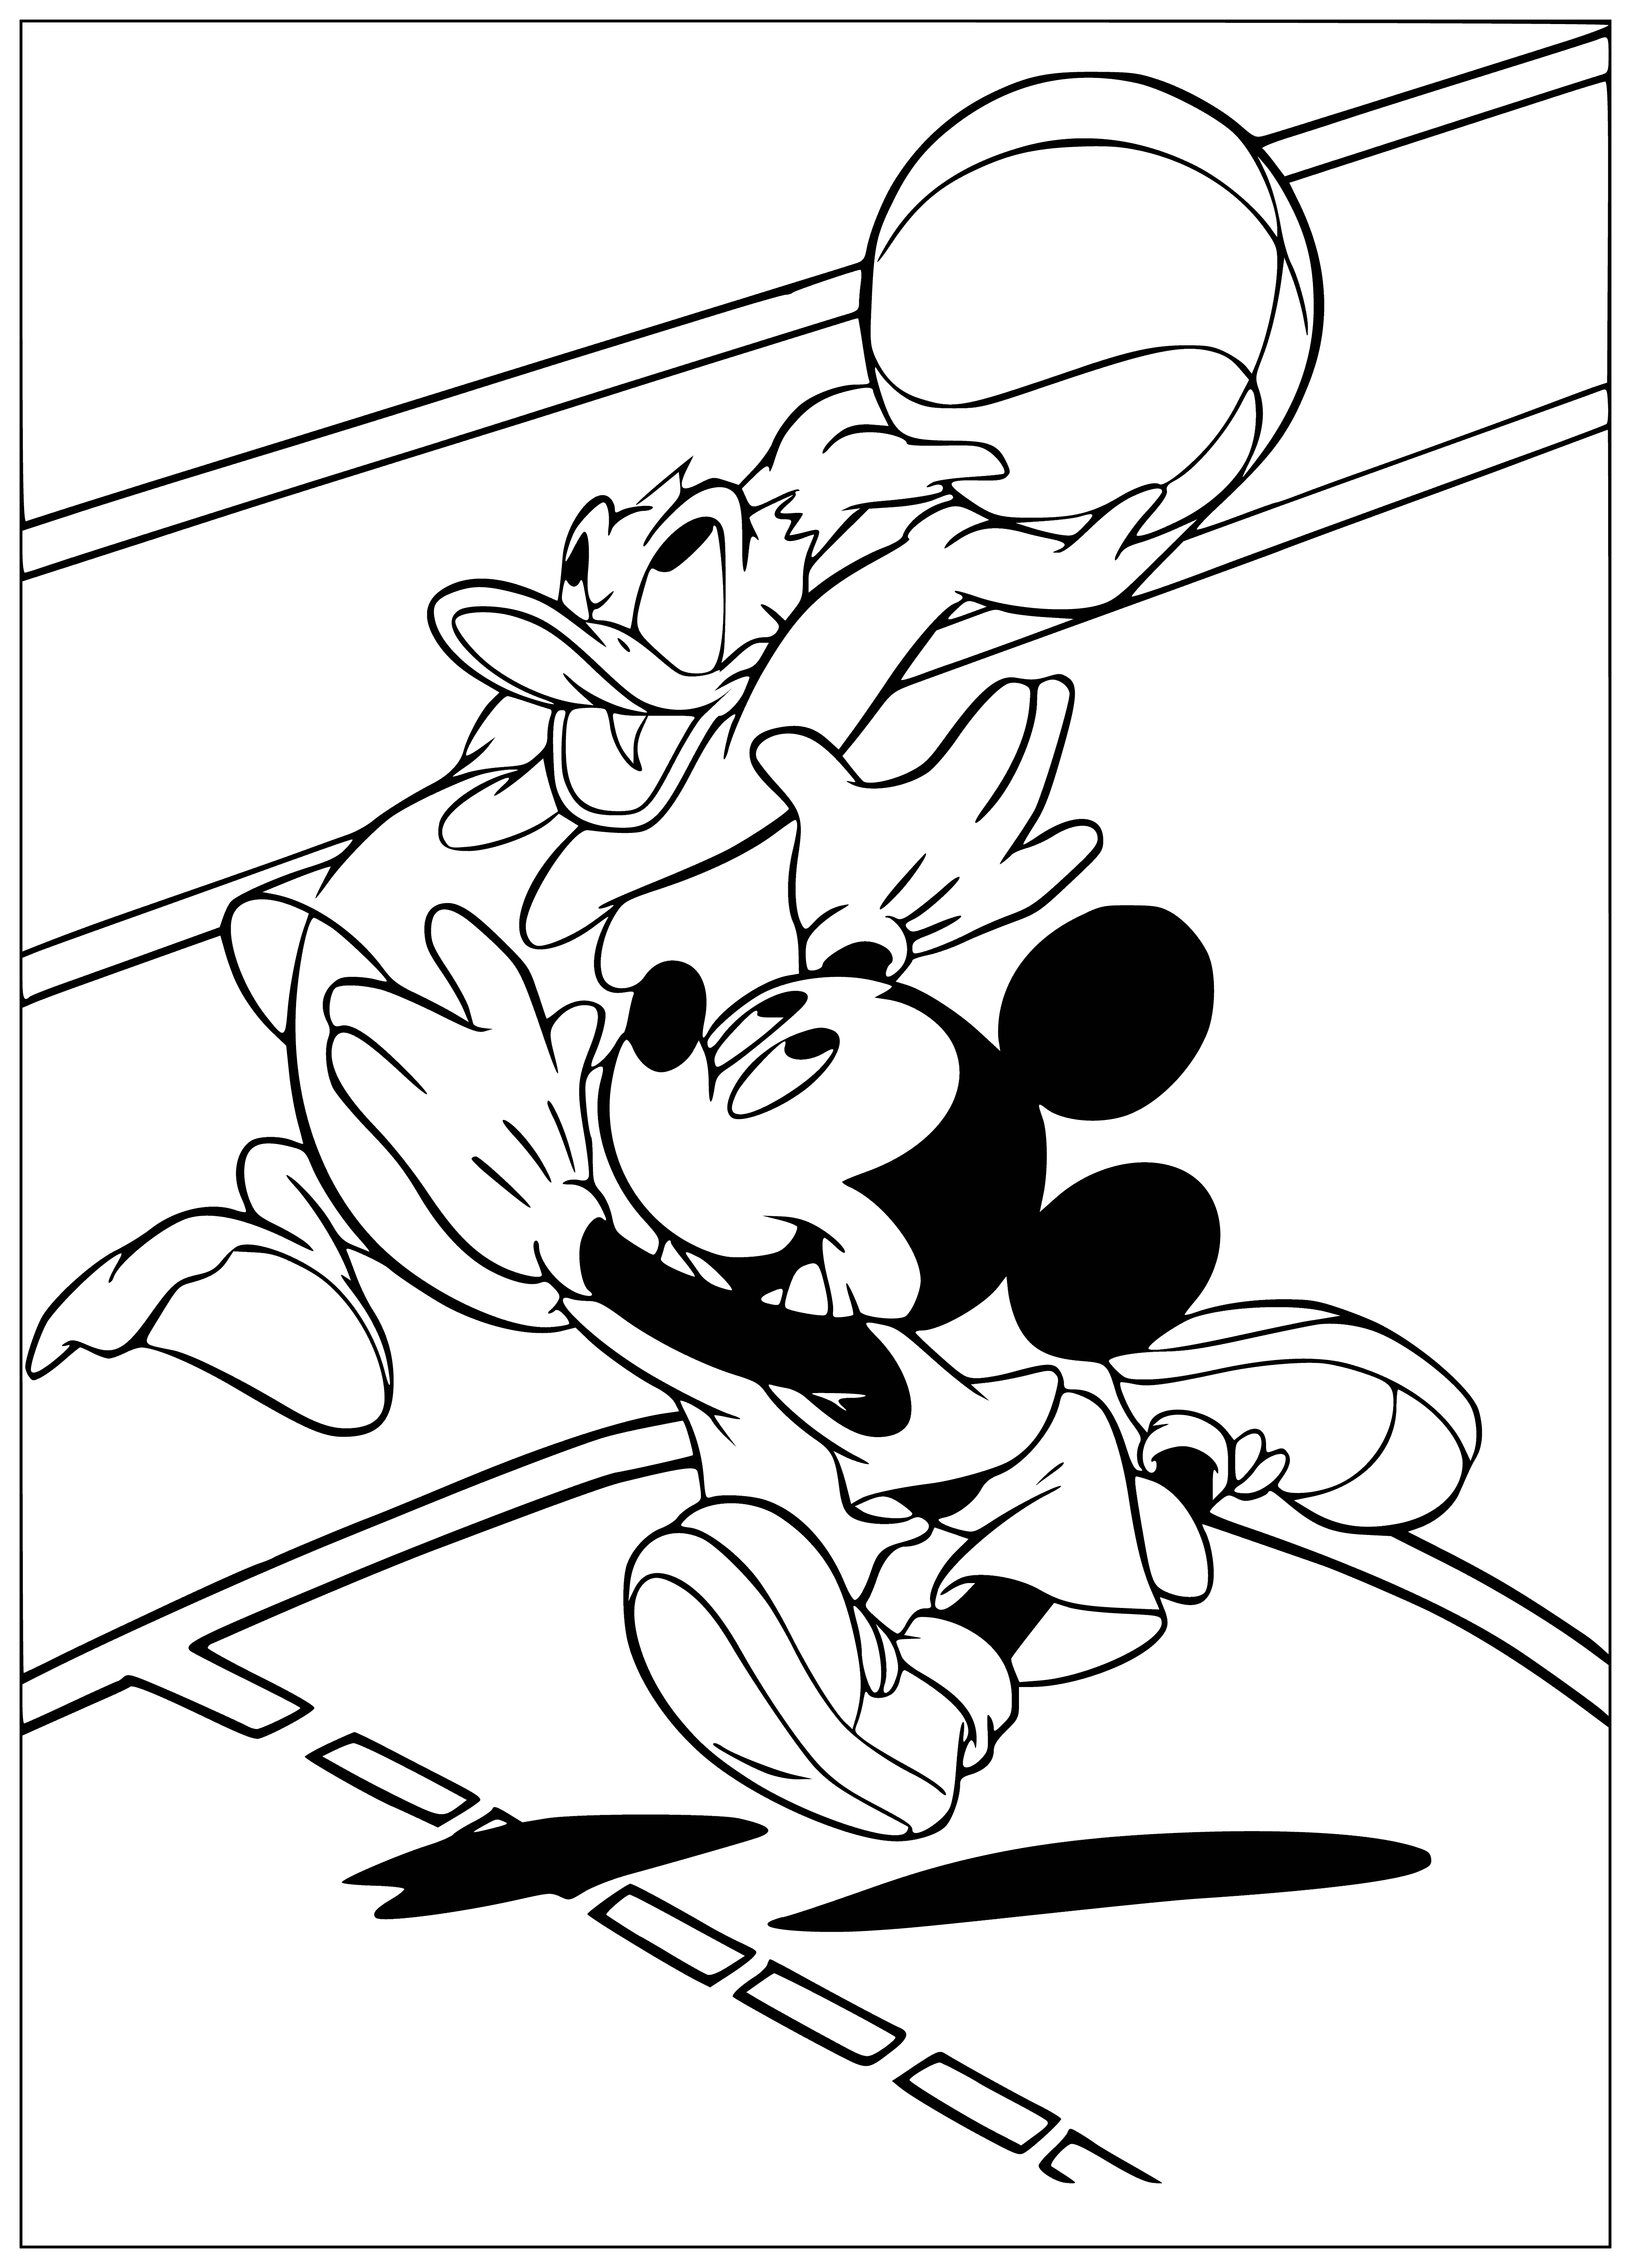 coloring page: Mickey, Goofy and Minnie are playing basketball while Donald is just observing.